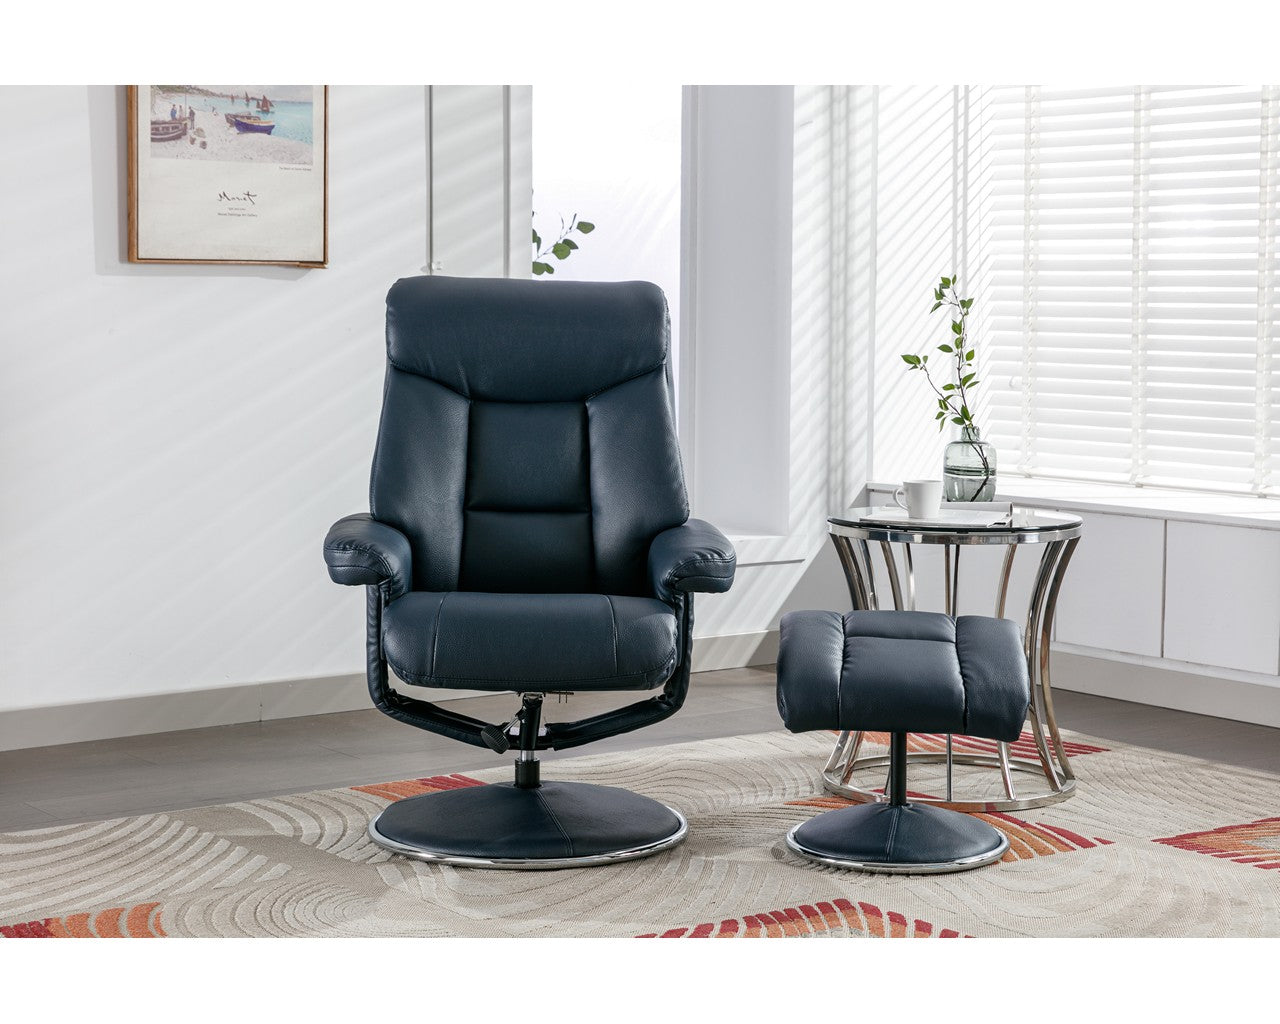 Swivel Recliner Chair Collection - Biarritz: Navy Plush